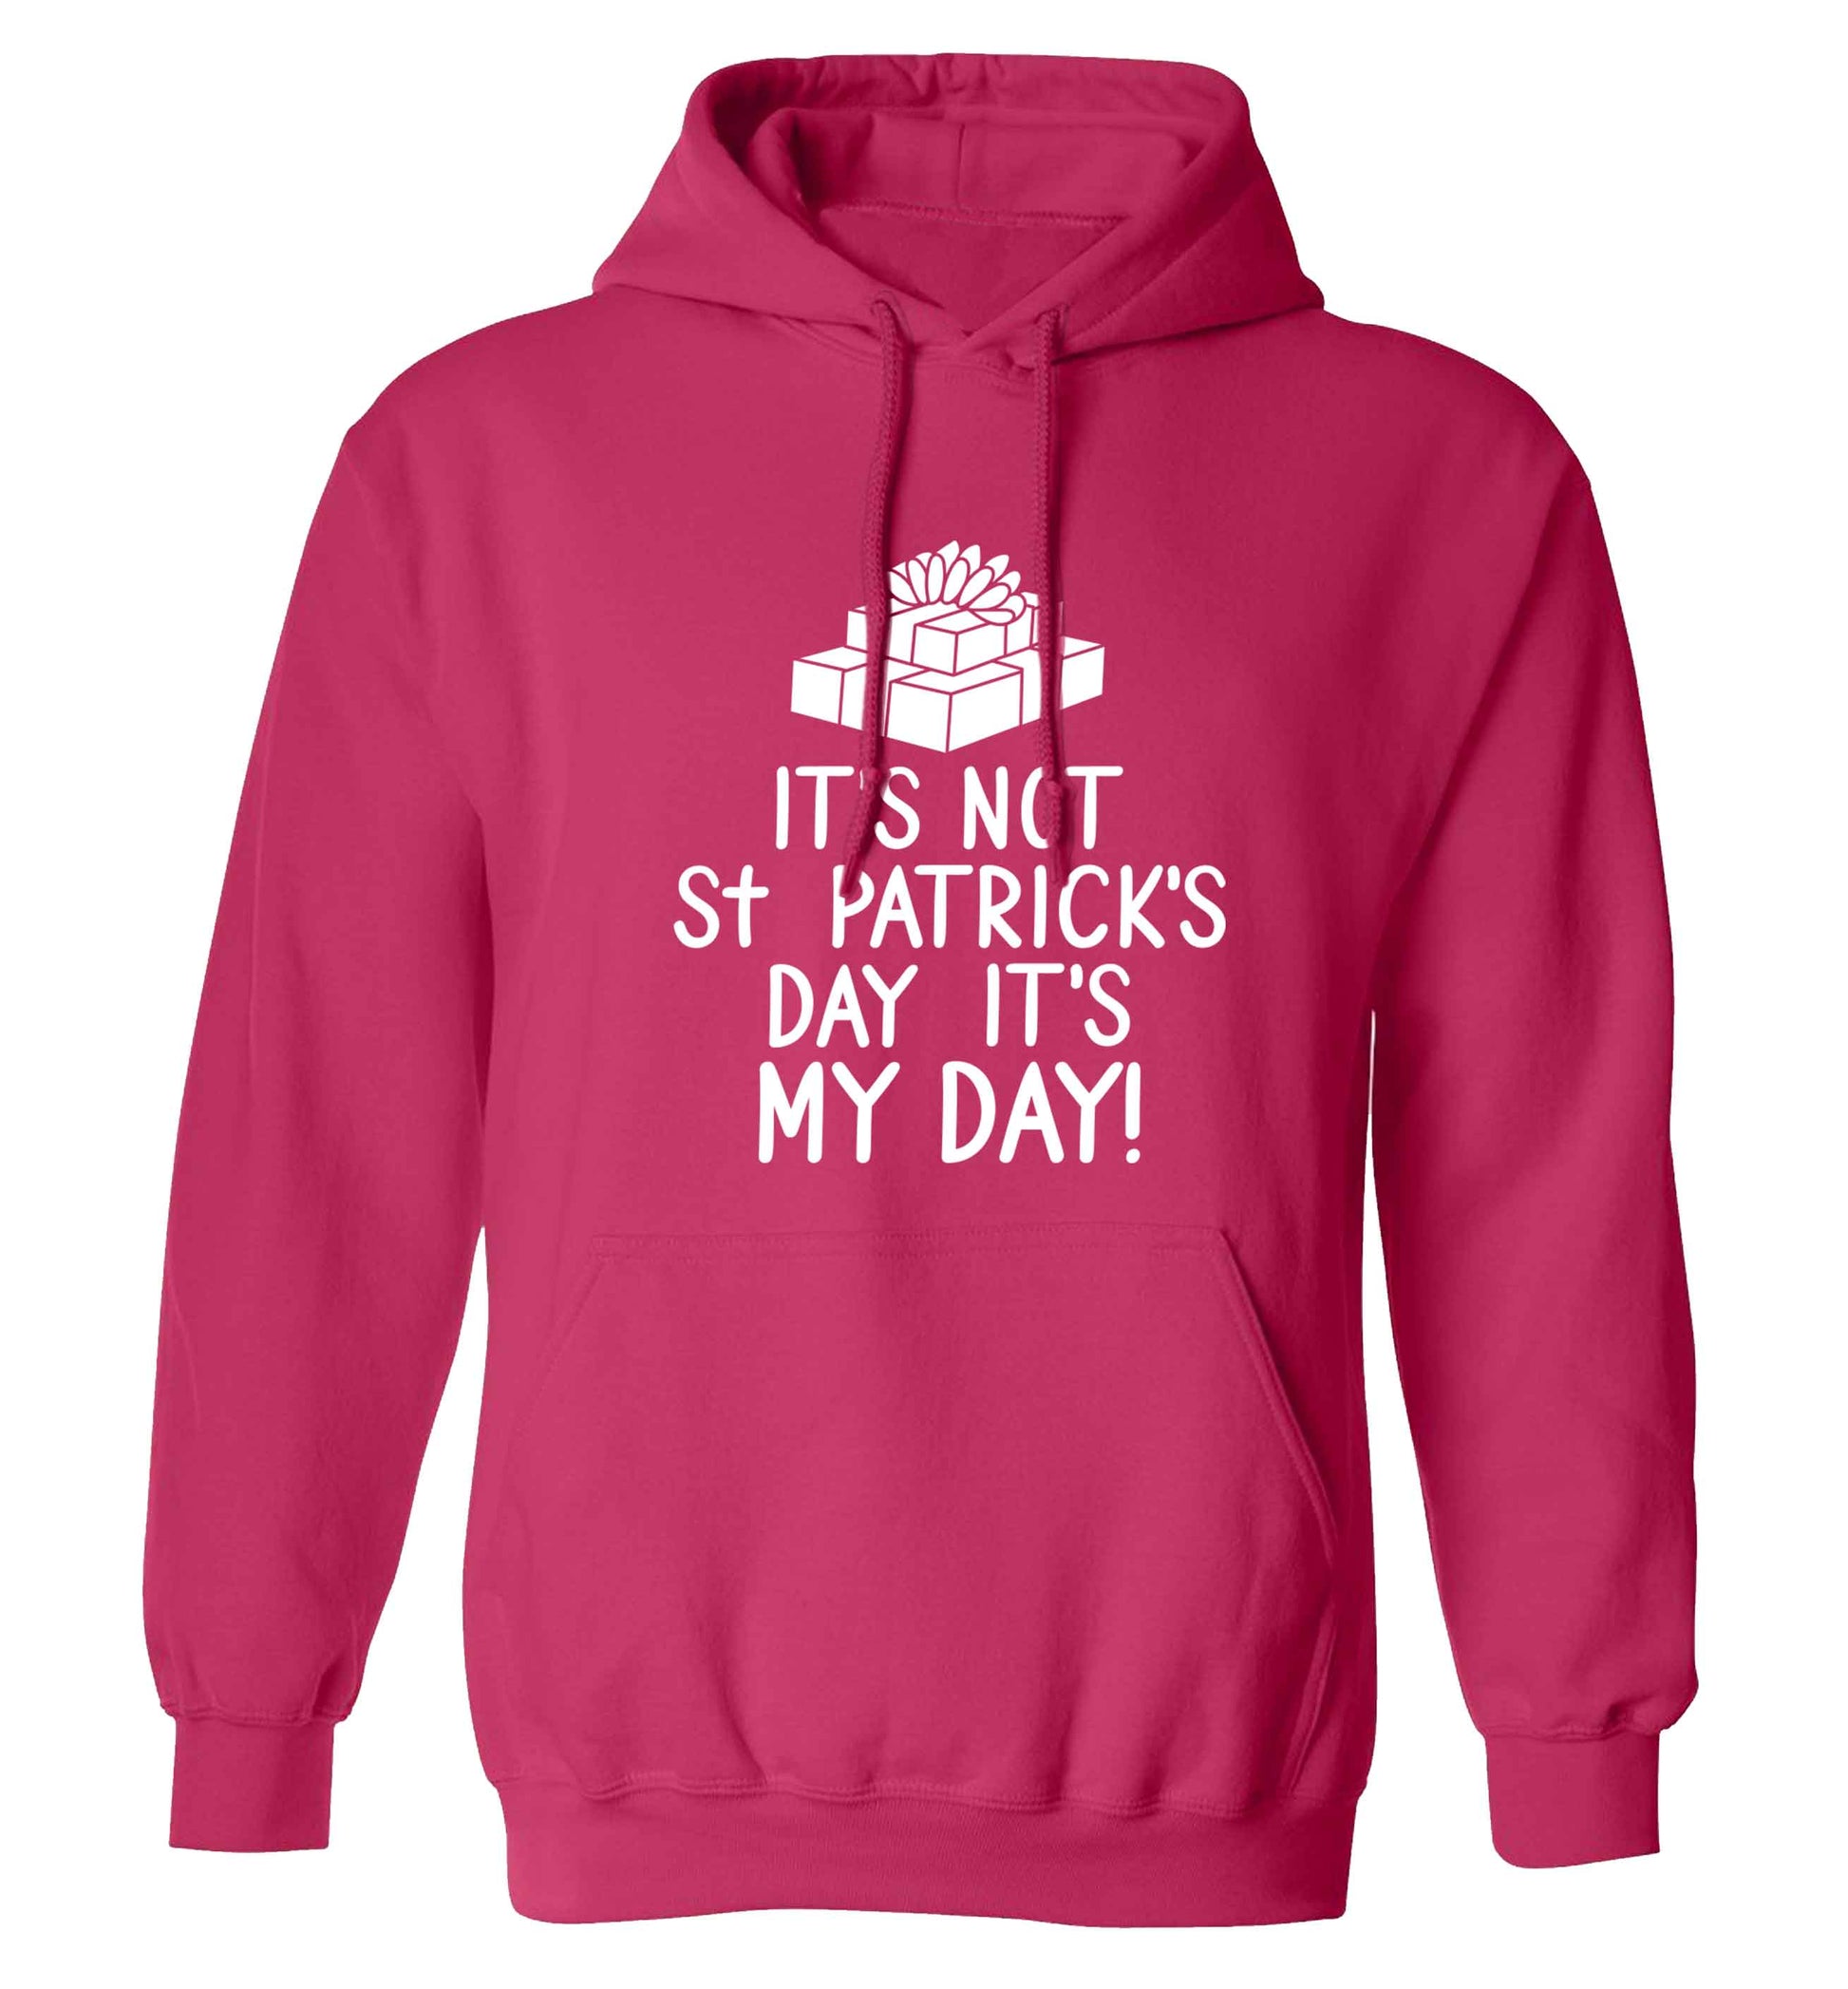 Funny gifts for your mum on mother's dayor her birthday! It's not St Patricks day it's my day adults unisex pink hoodie 2XL